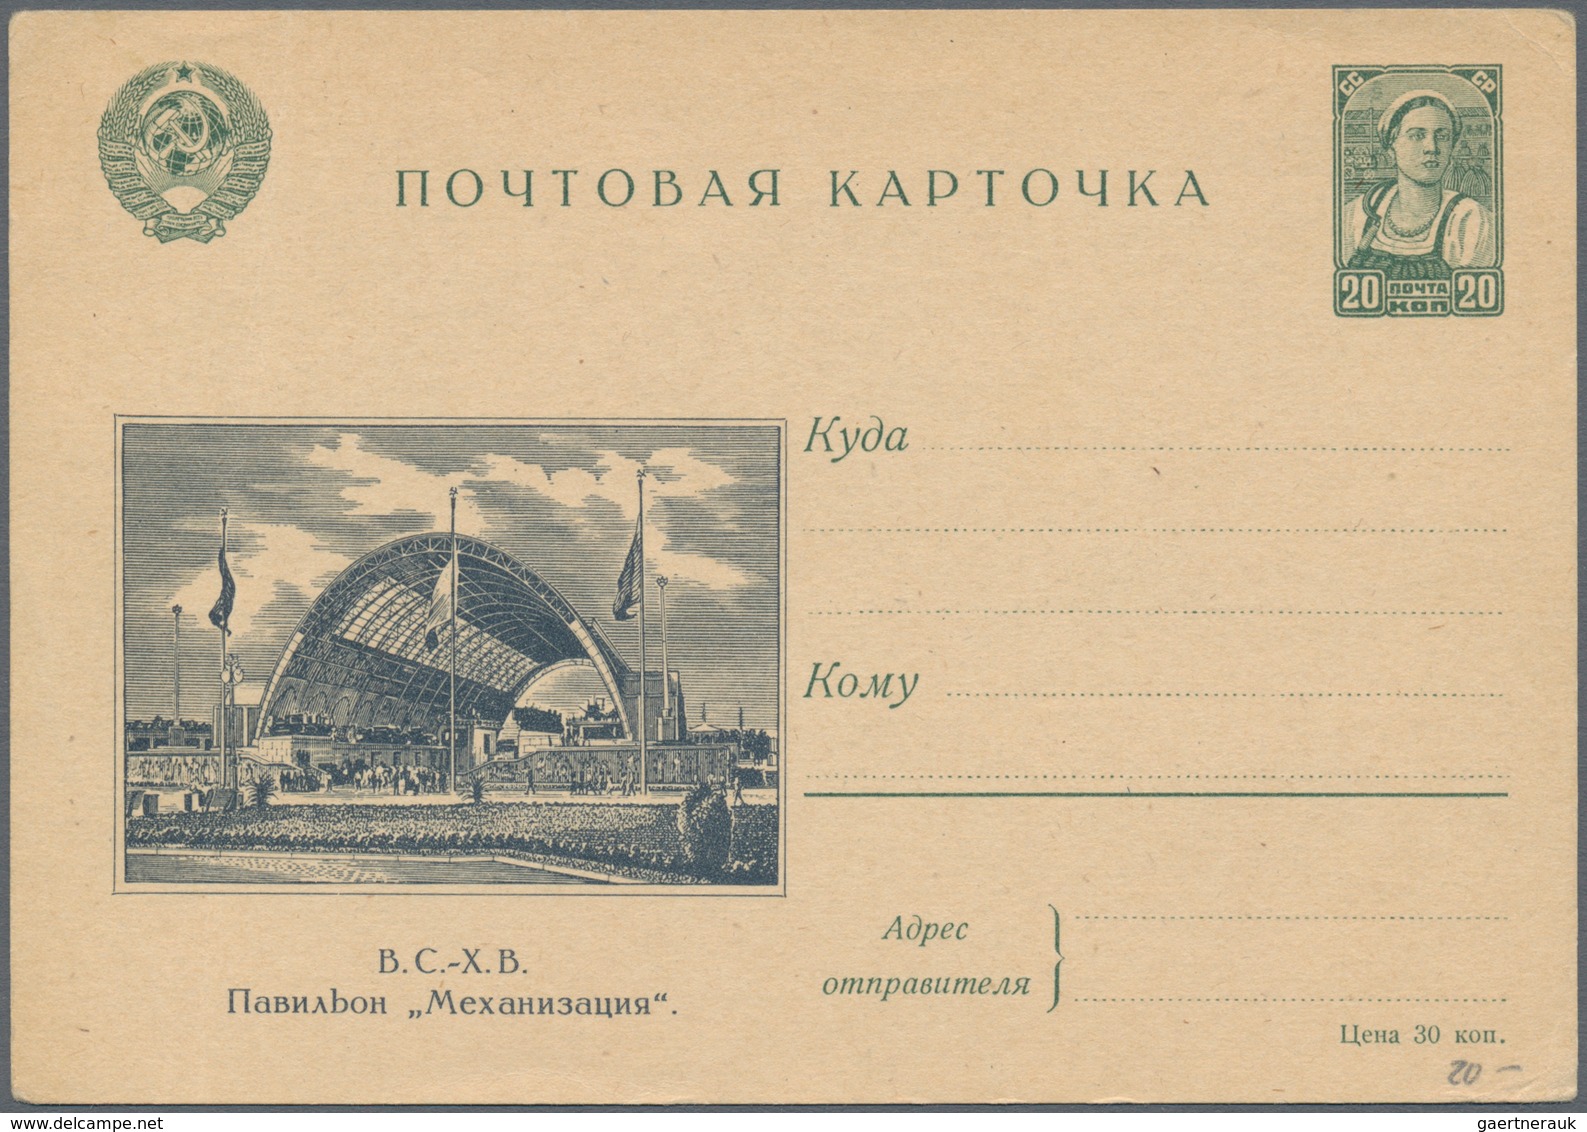 Sowjetunion - Ganzsachen: 1941, 10 unused picture postcards complete set Palace of Soviet and Agricu